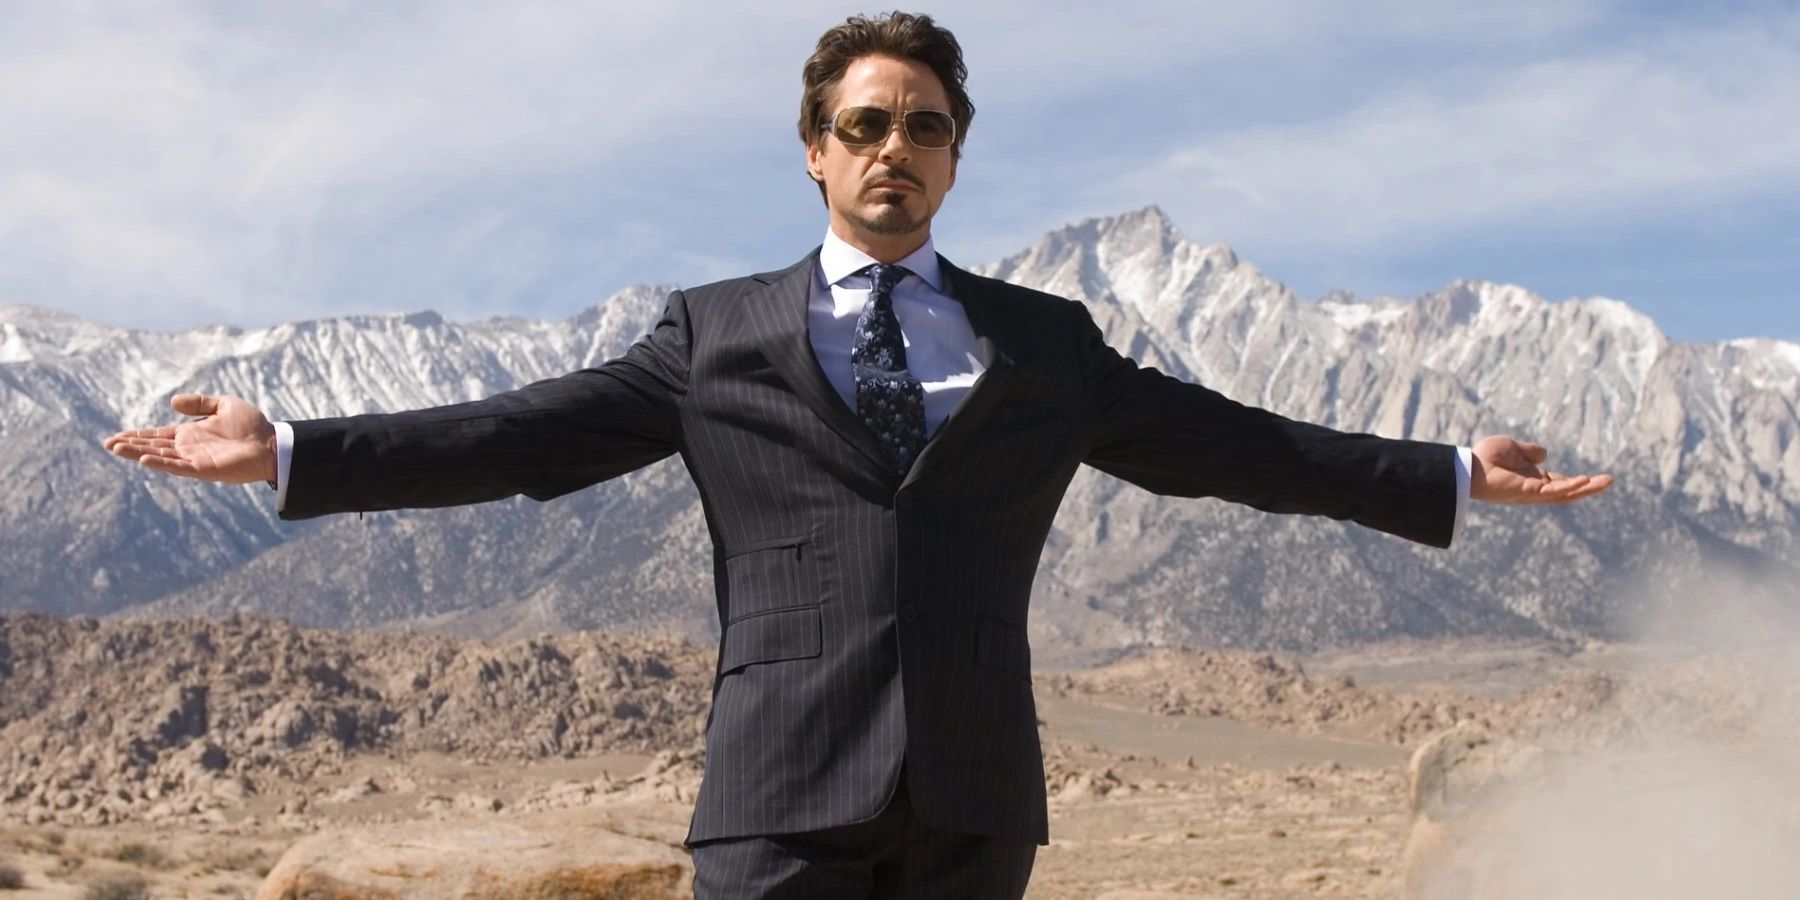 Tony Stark holding his arms out in Afghanistan in Iron Man.